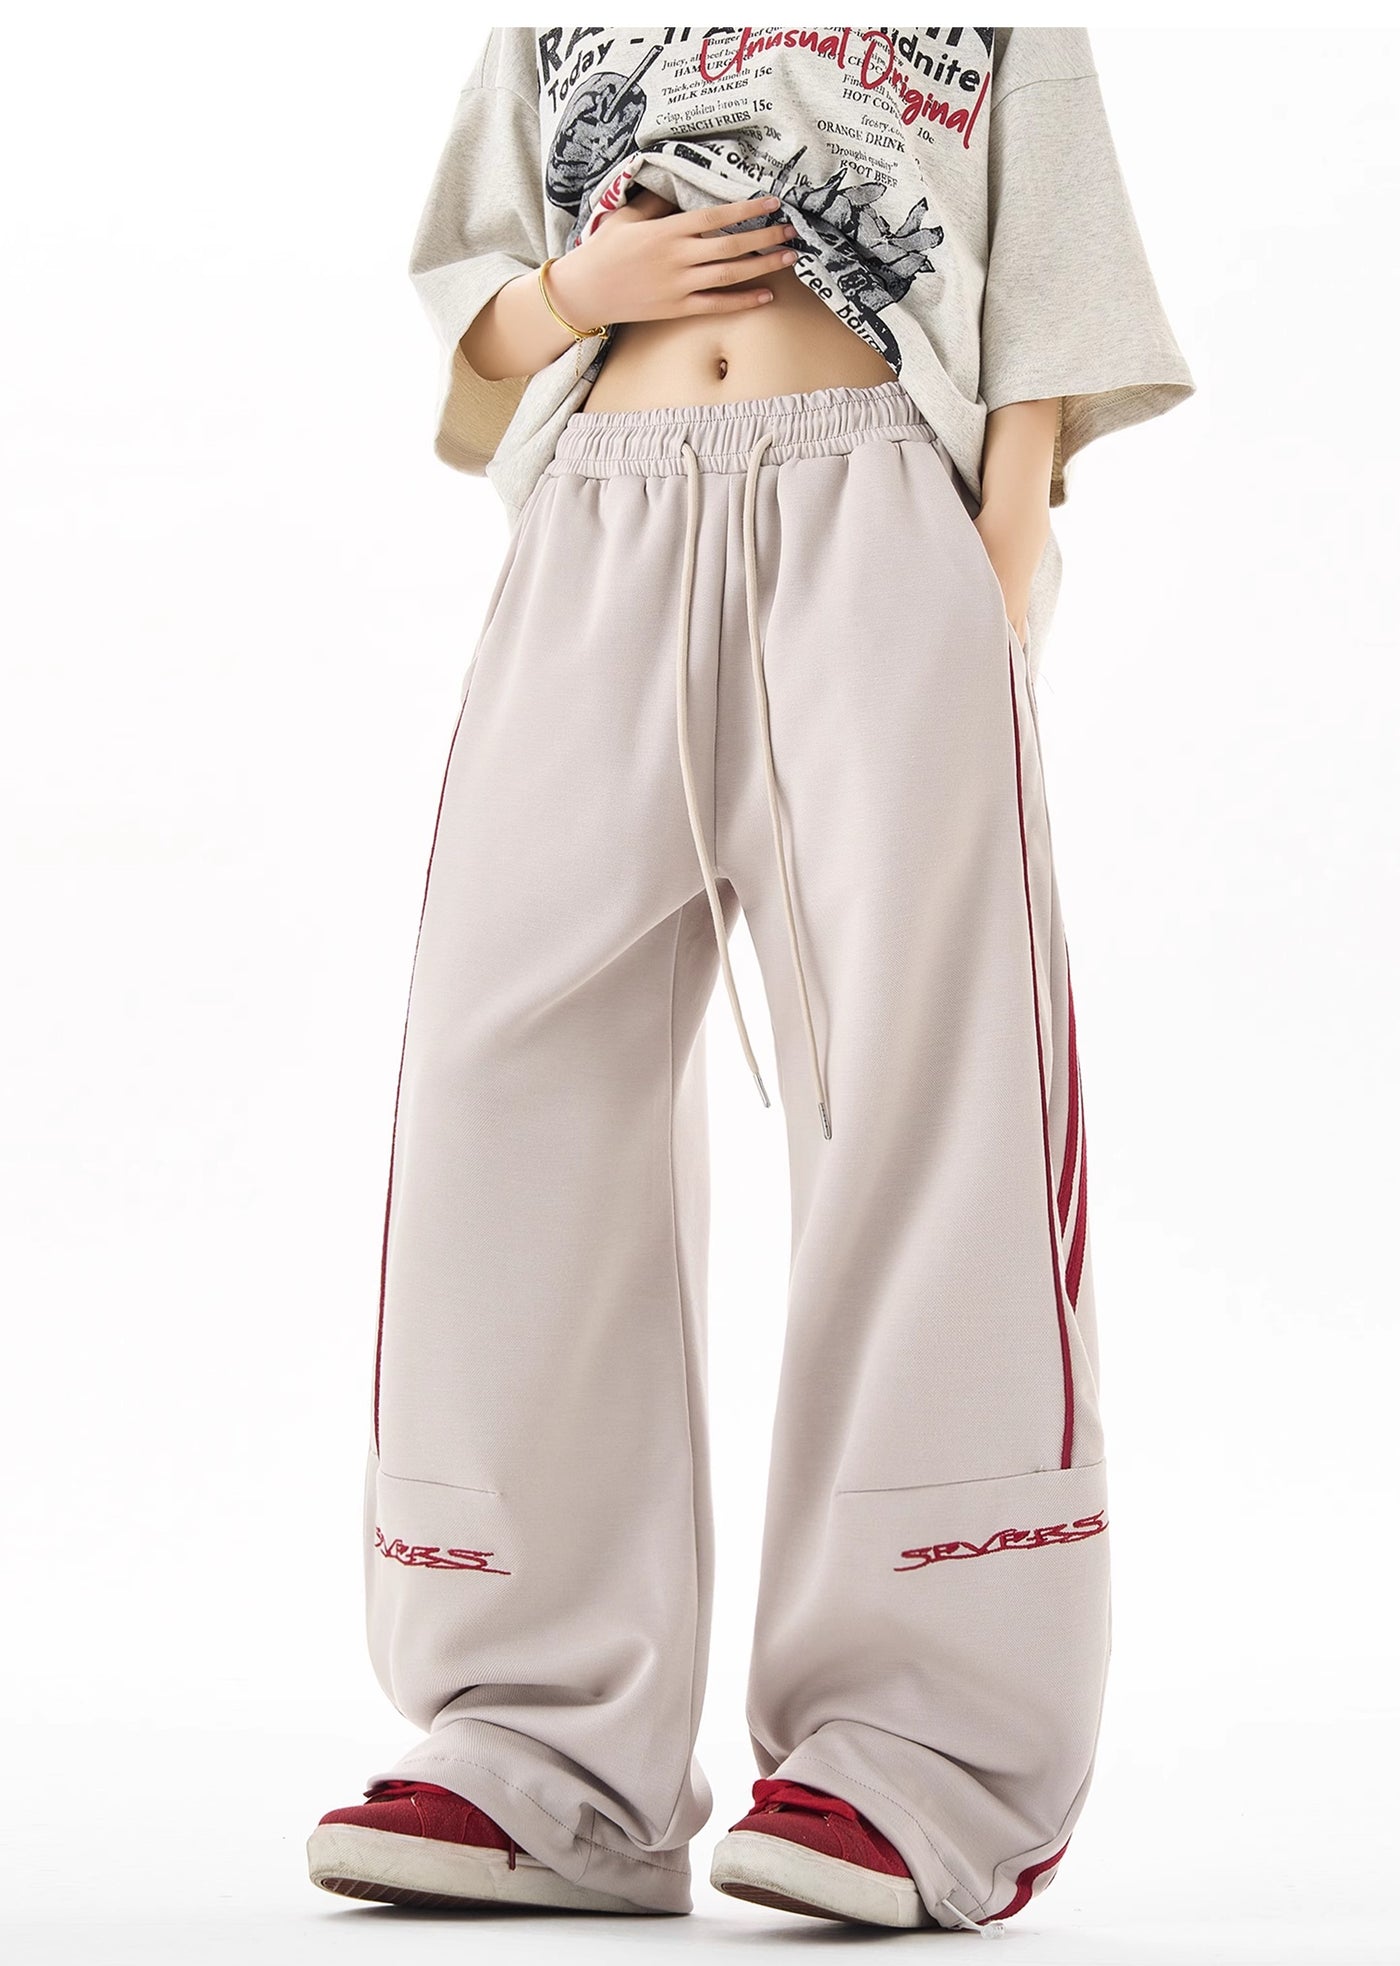 [H GANG X] Side three red color wide silhouette pants HX0043